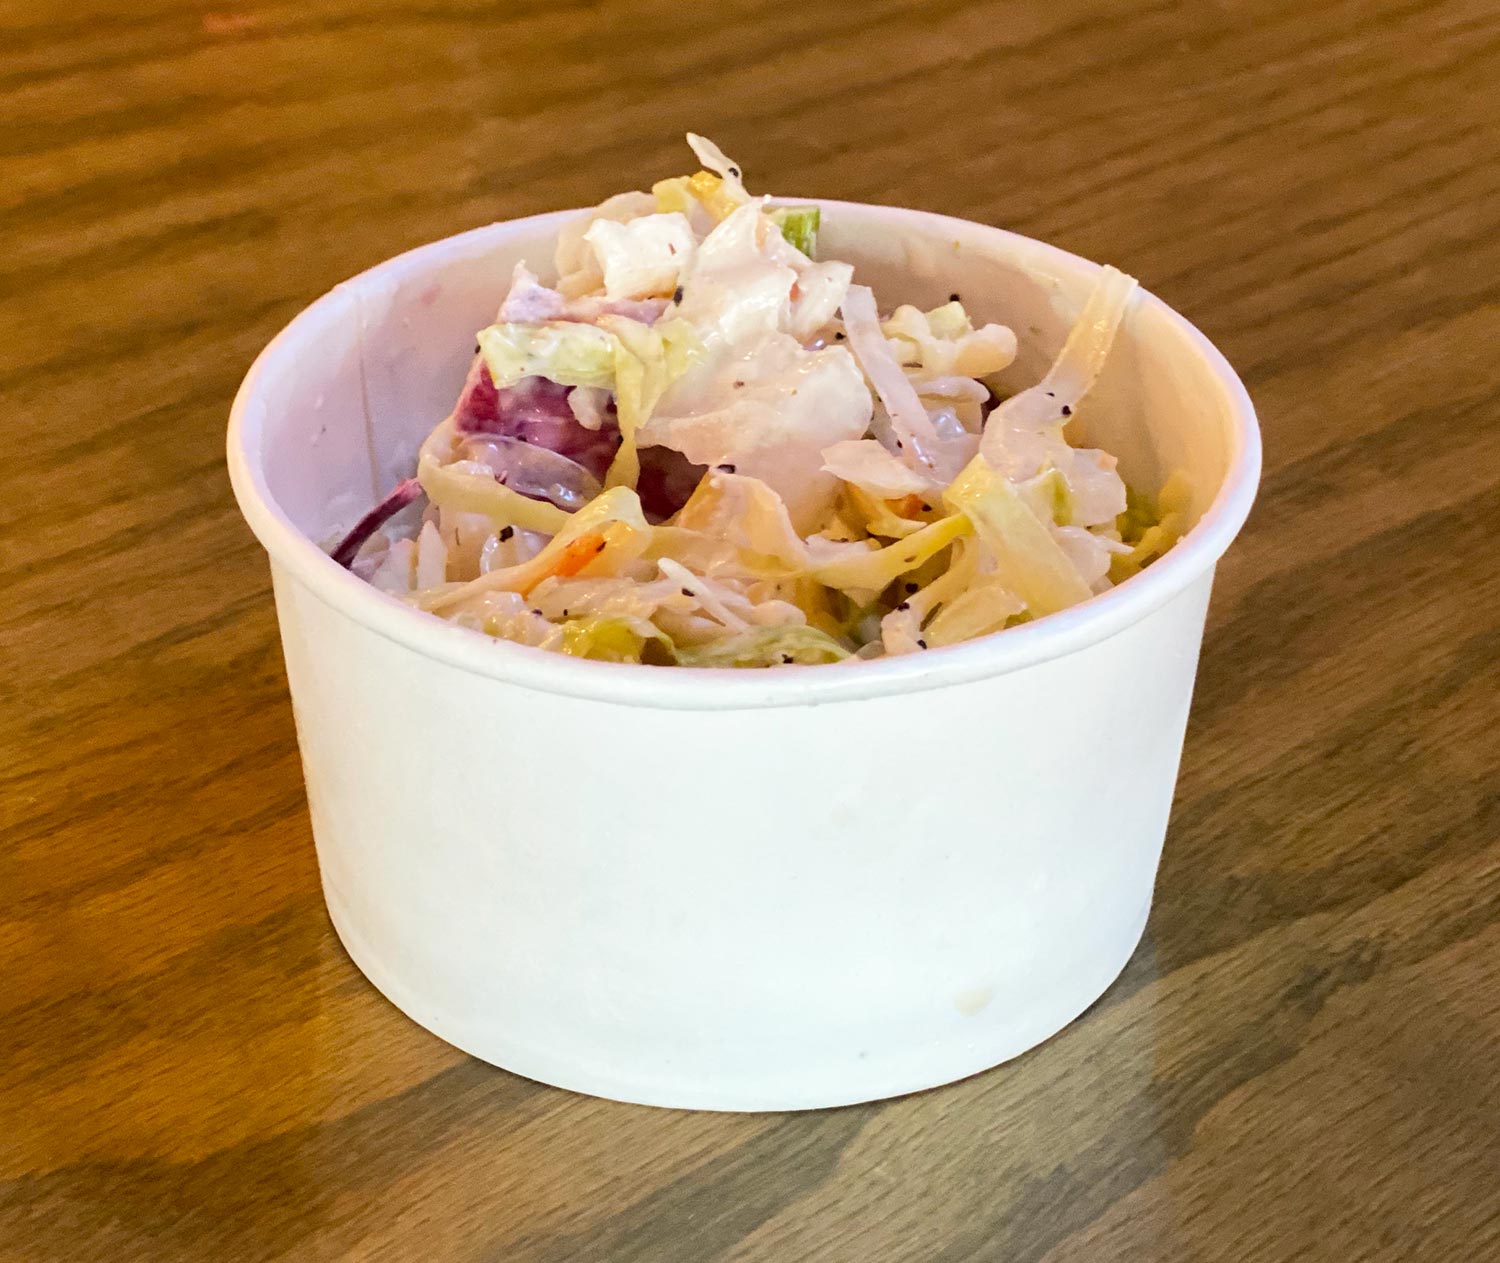 A side order of cole slaw at Old 300 BBQ